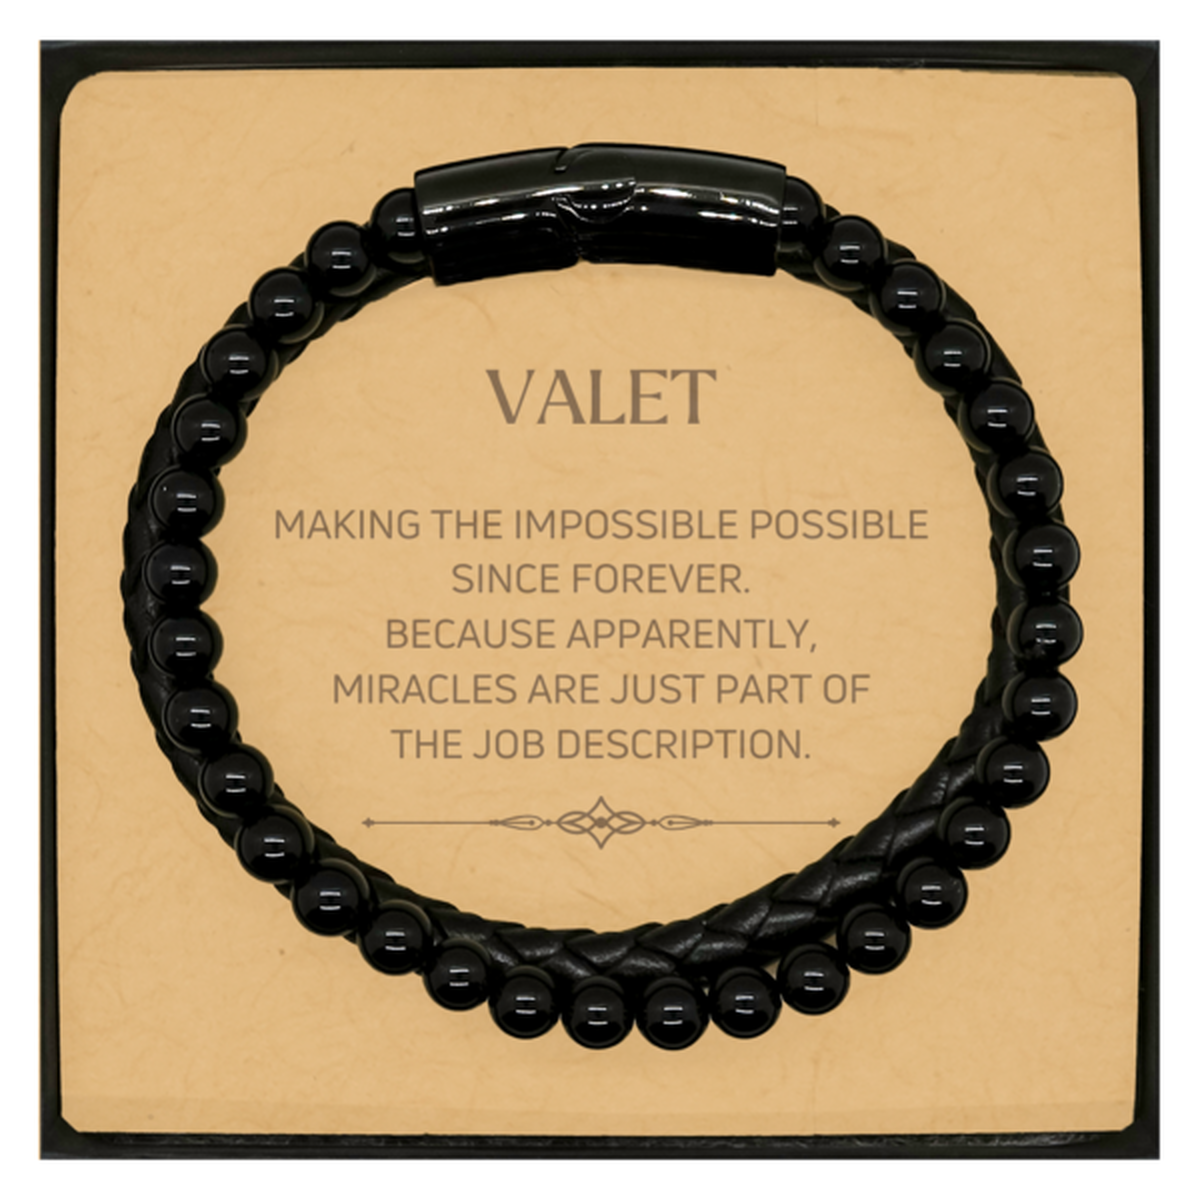 Funny Valet Gifts, Miracles are just part of the job description, Inspirational Birthday Christmas Stone Leather Bracelets For Valet, Men, Women, Coworkers, Friends, Boss